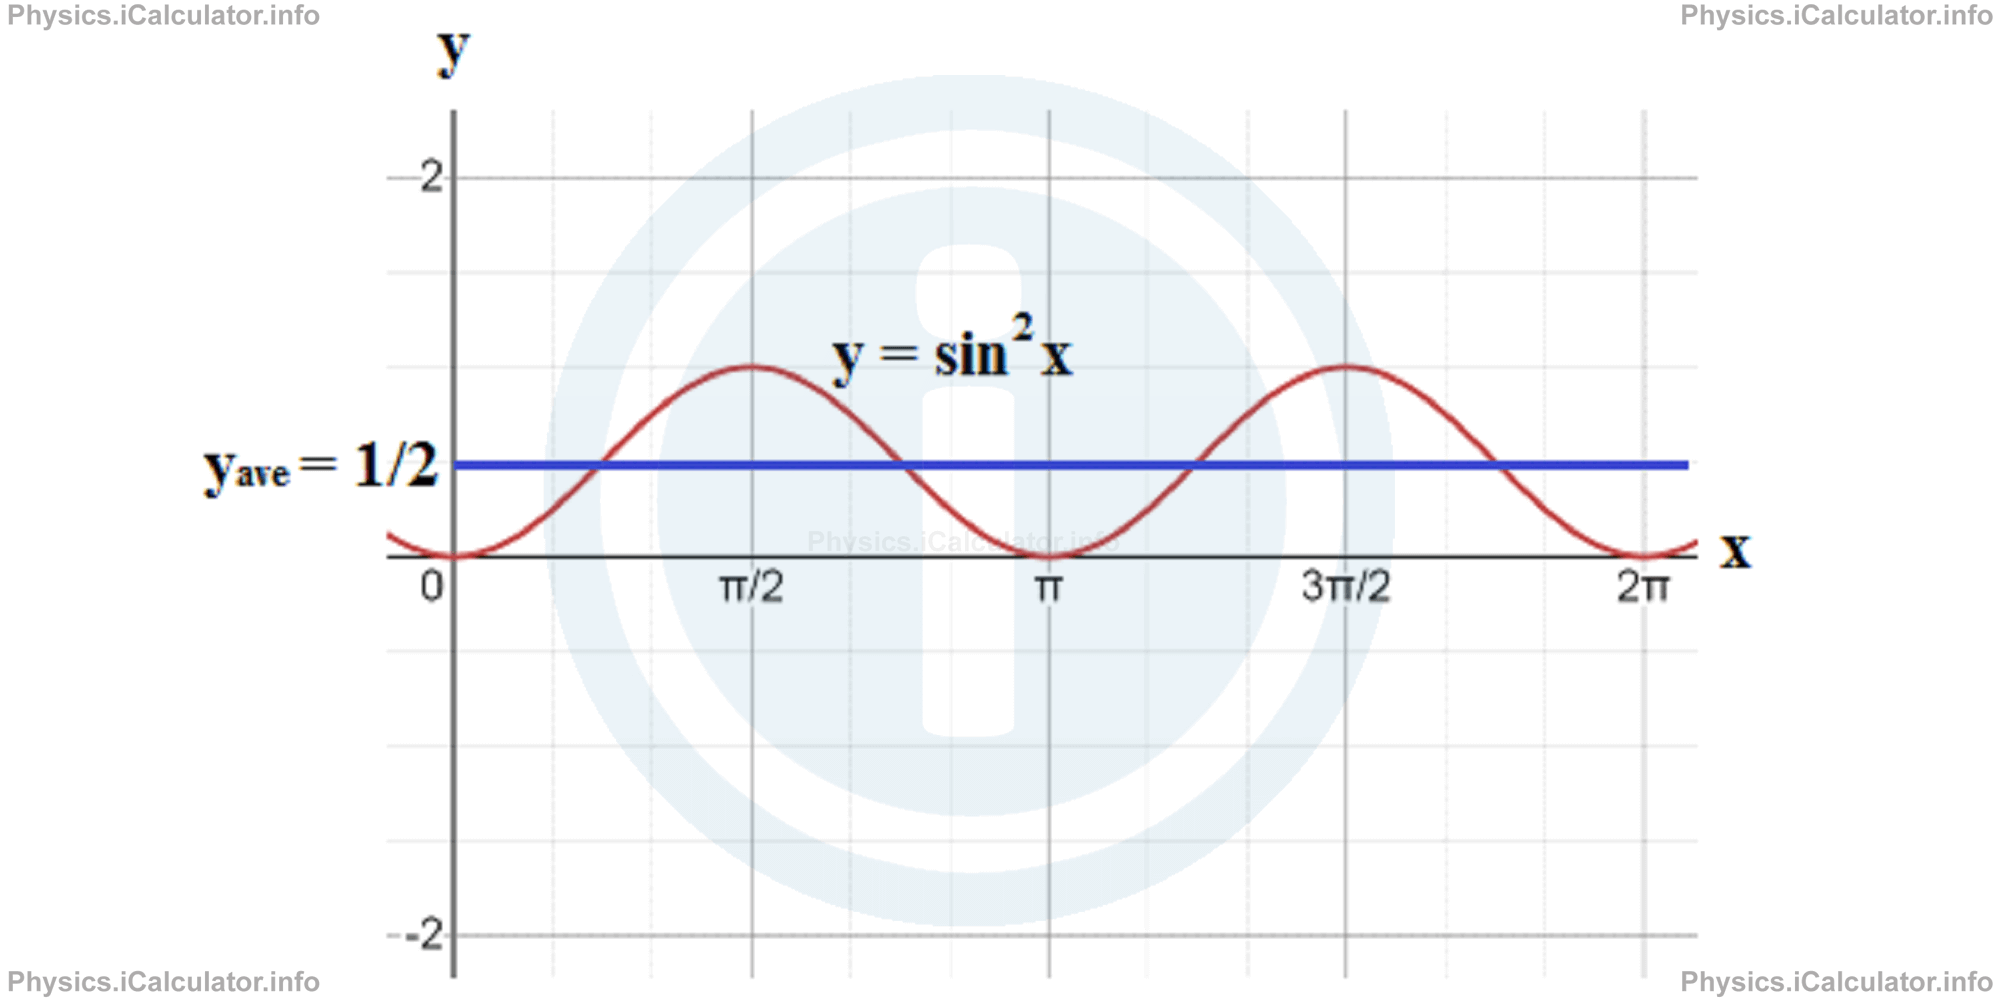 Physics Tutorials: This image provides visual information for the physics tutorial Power in an Alternating Circuit. Transformers 